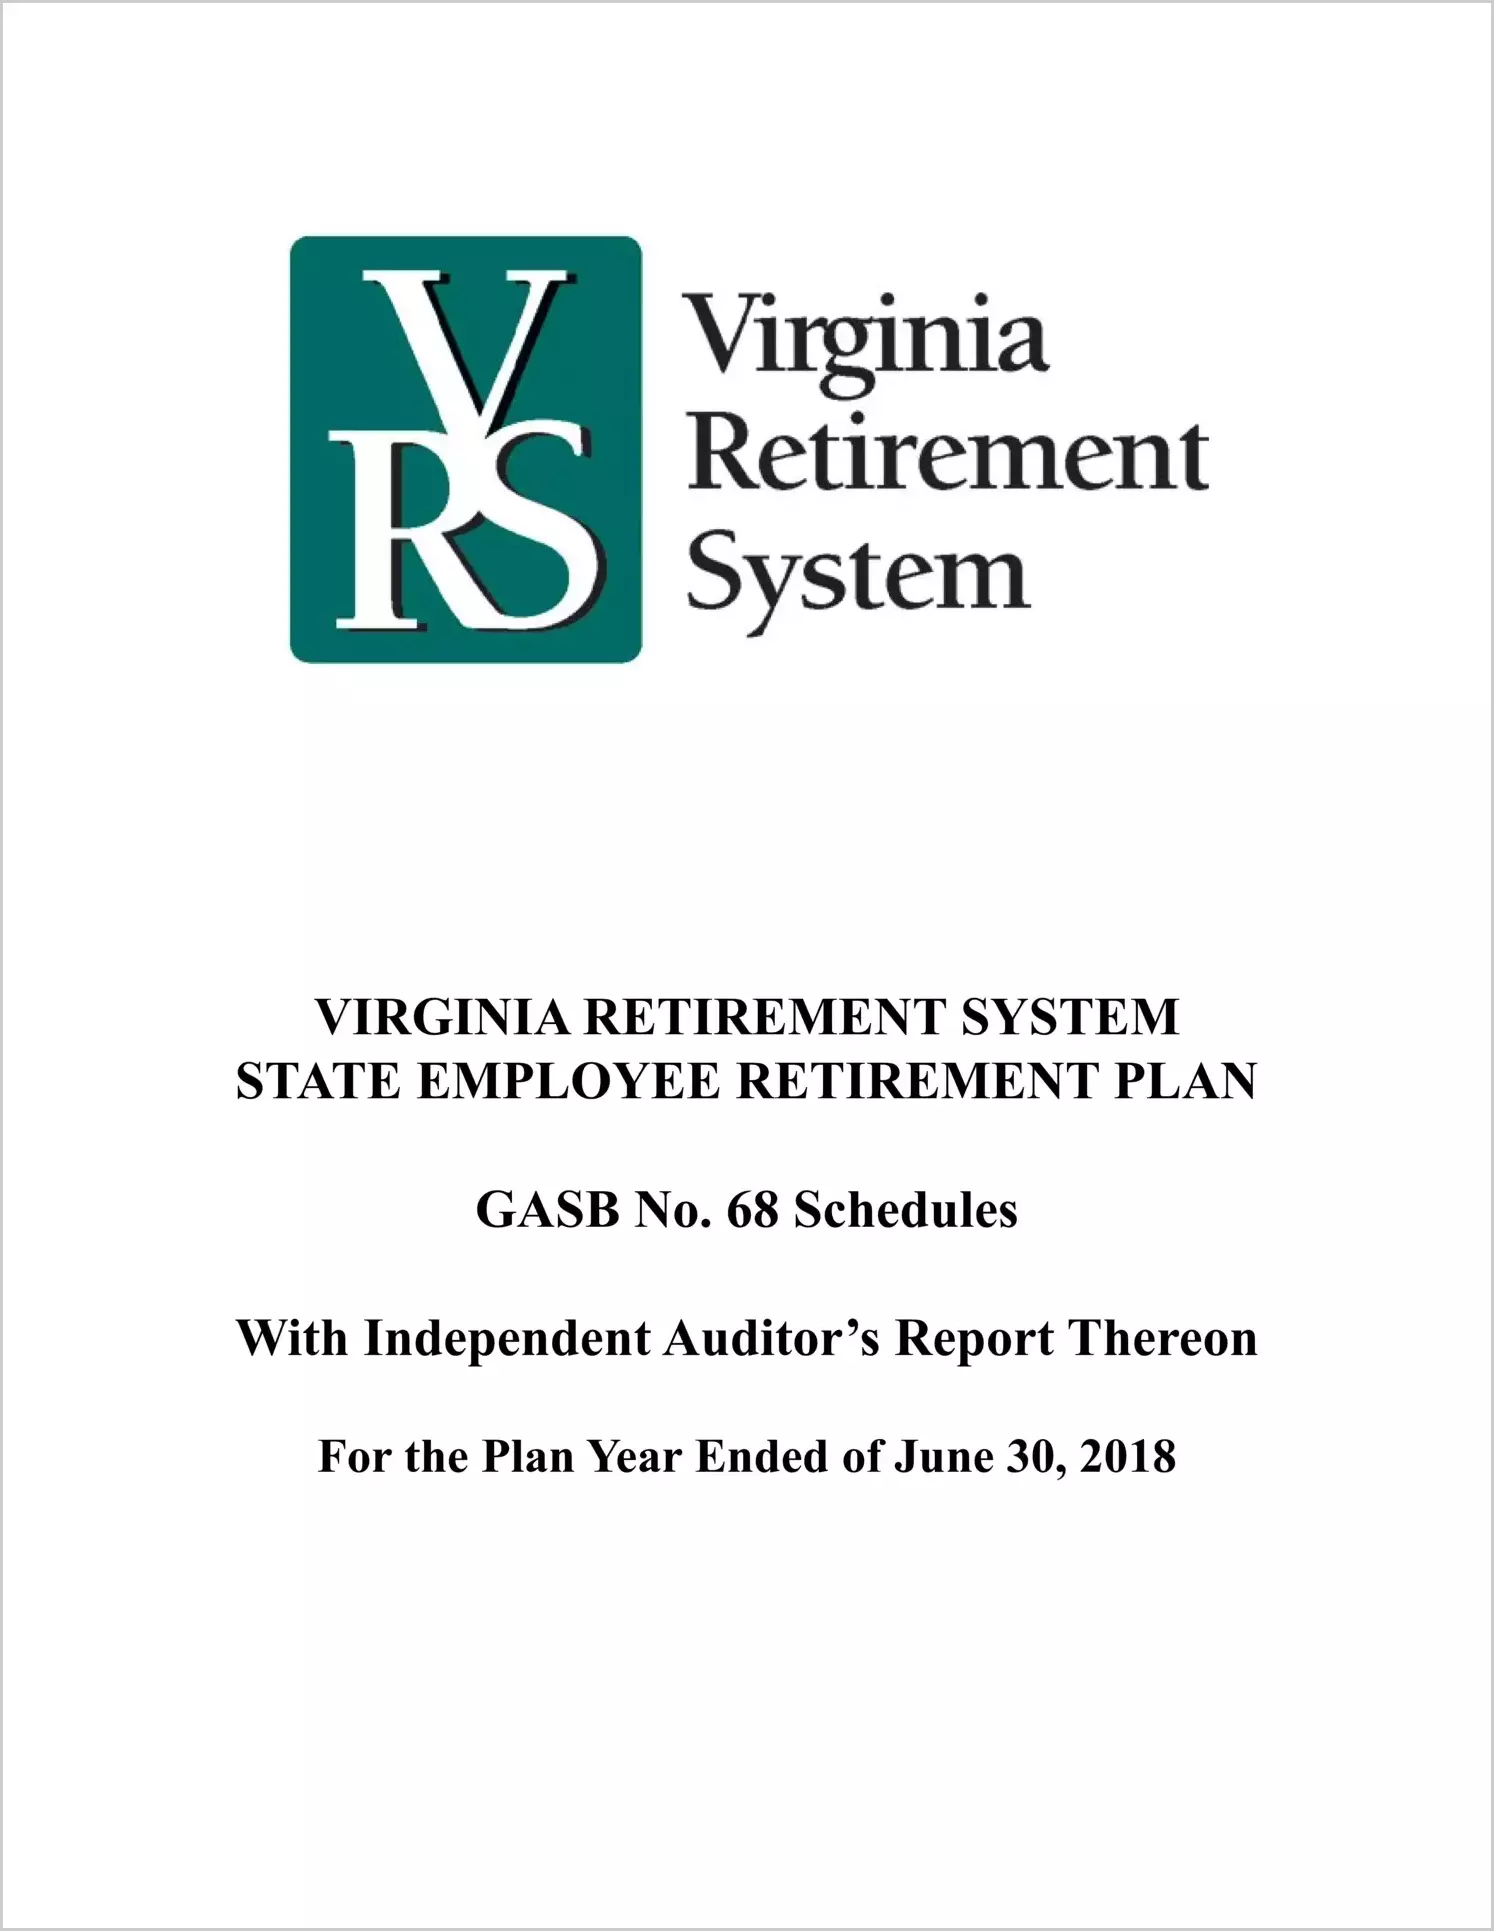 GASB 68 Schedule - Virginia Retirement System State Employee Retirement Plan for the plan year ended June 30, 2018